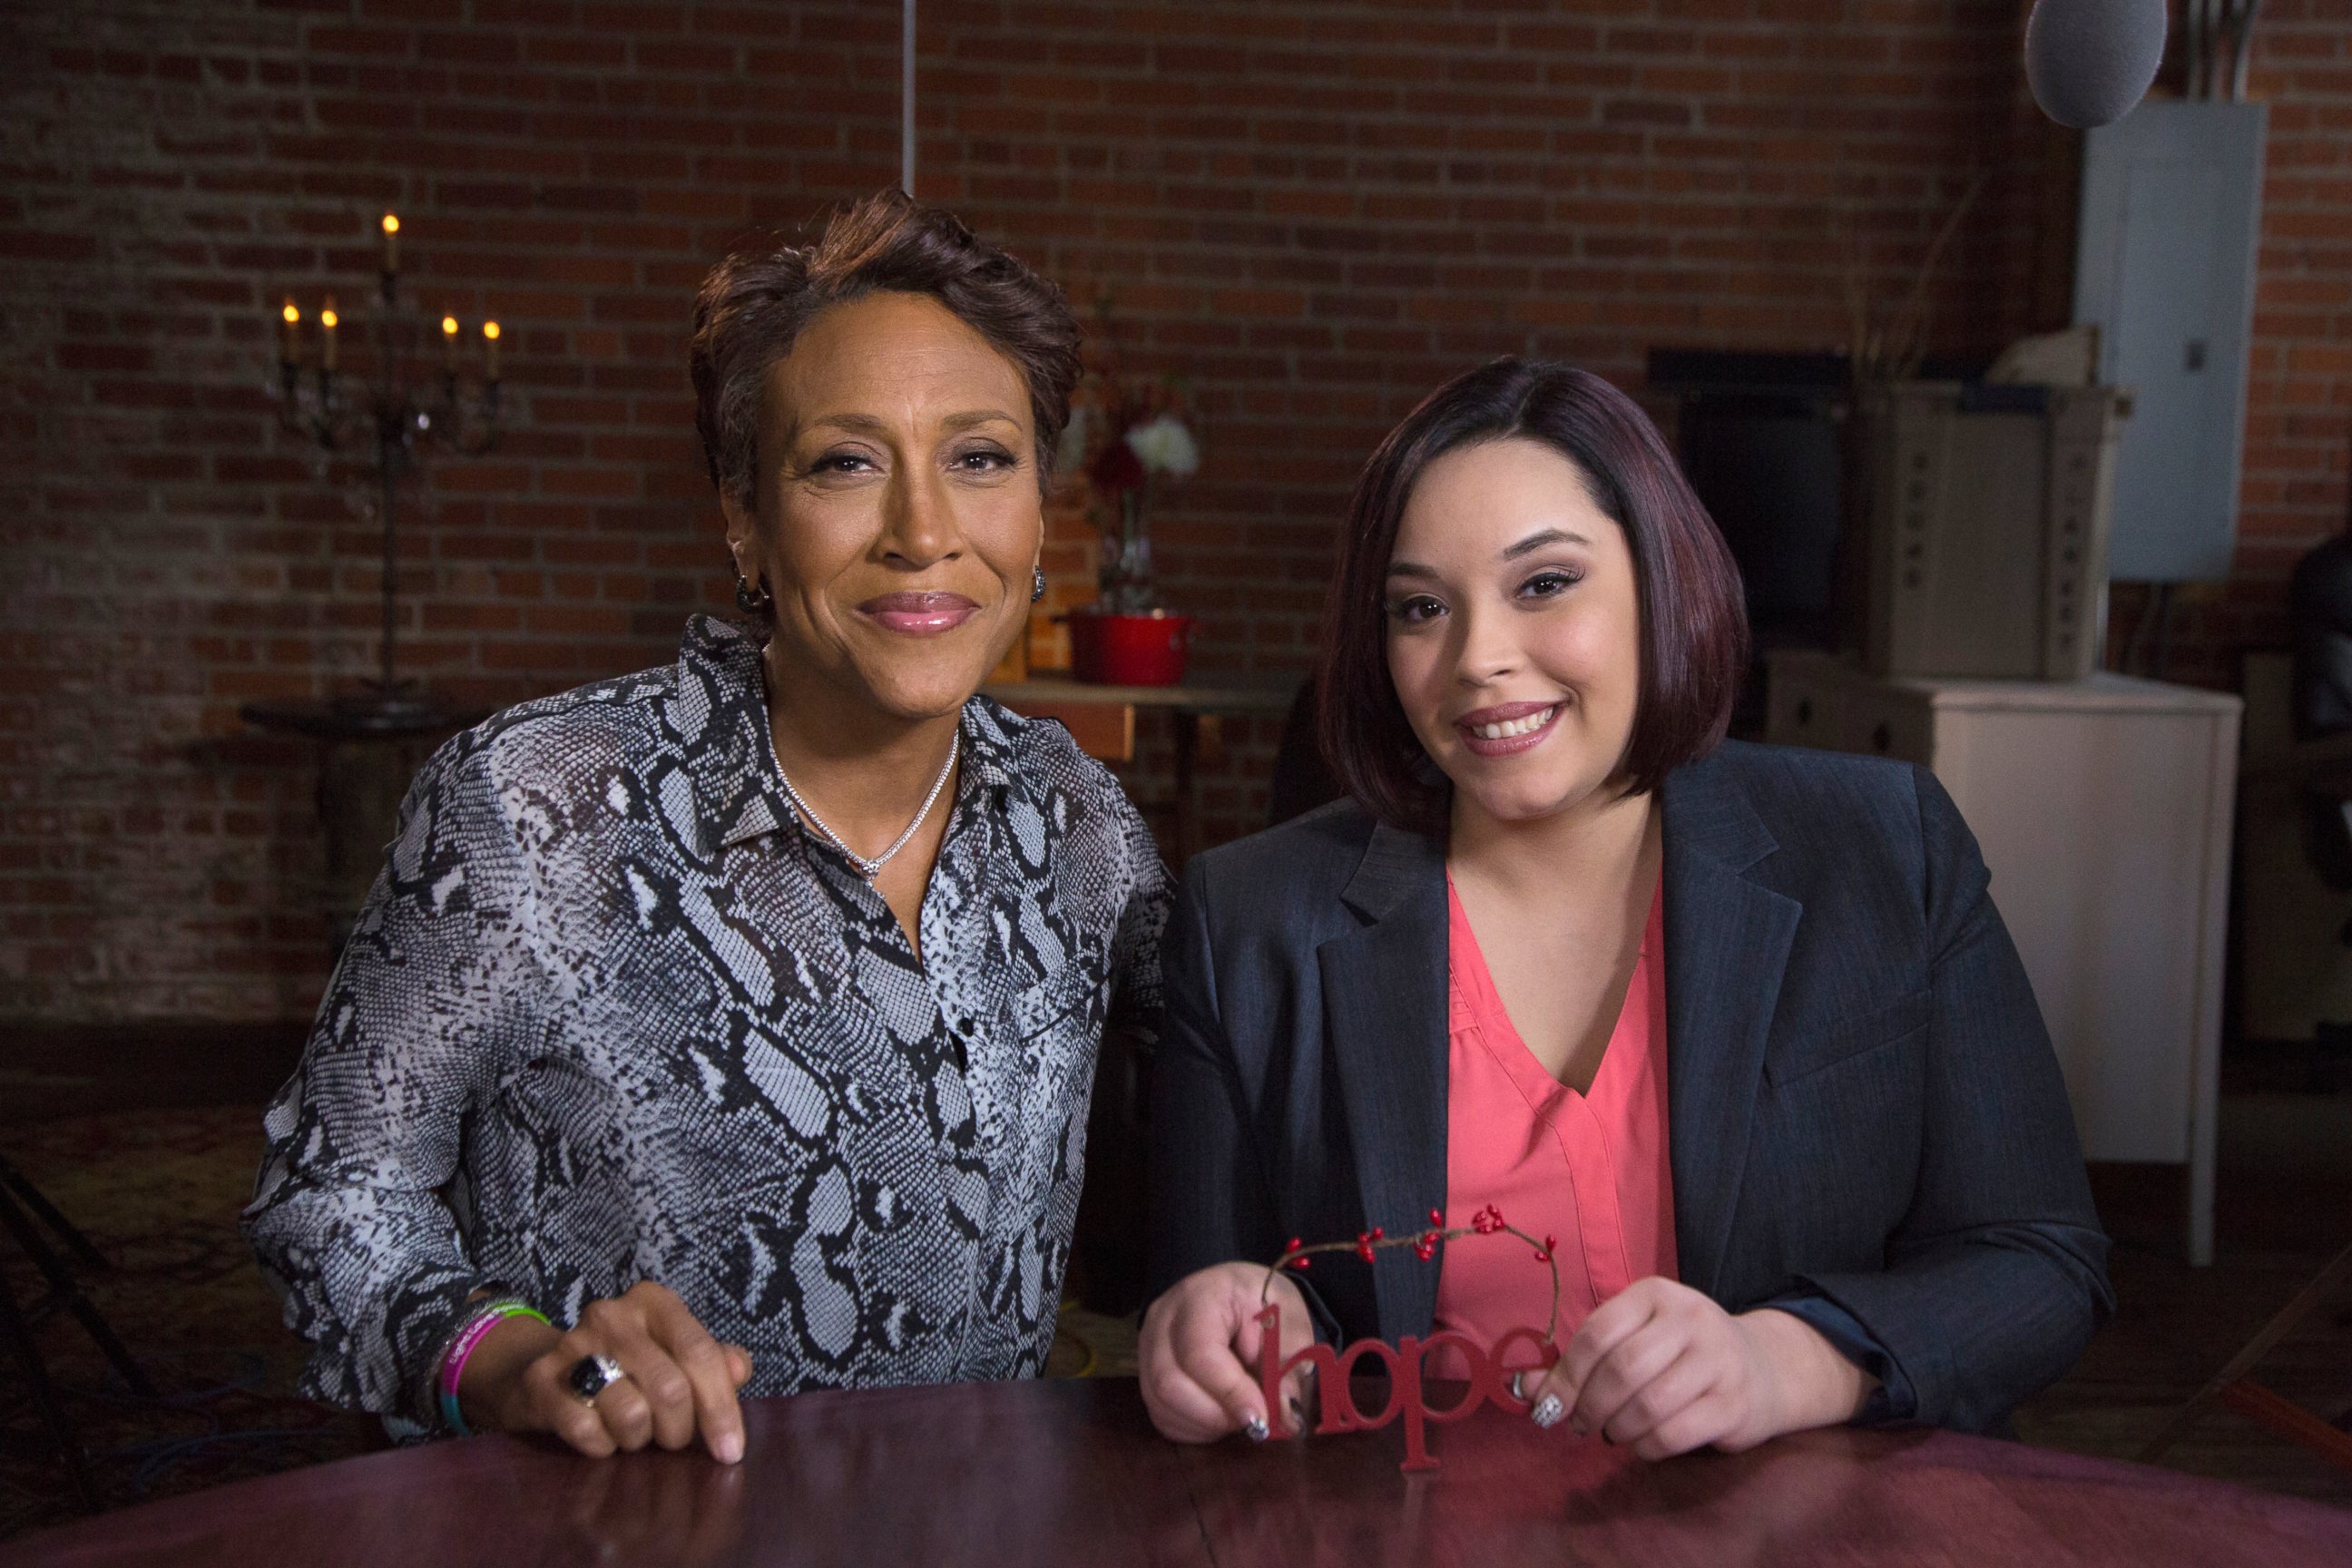 PHOTO: ABC News' Robin Roberts is pictured here with Cleveland kidnapping survivor Gina DeJesus.  